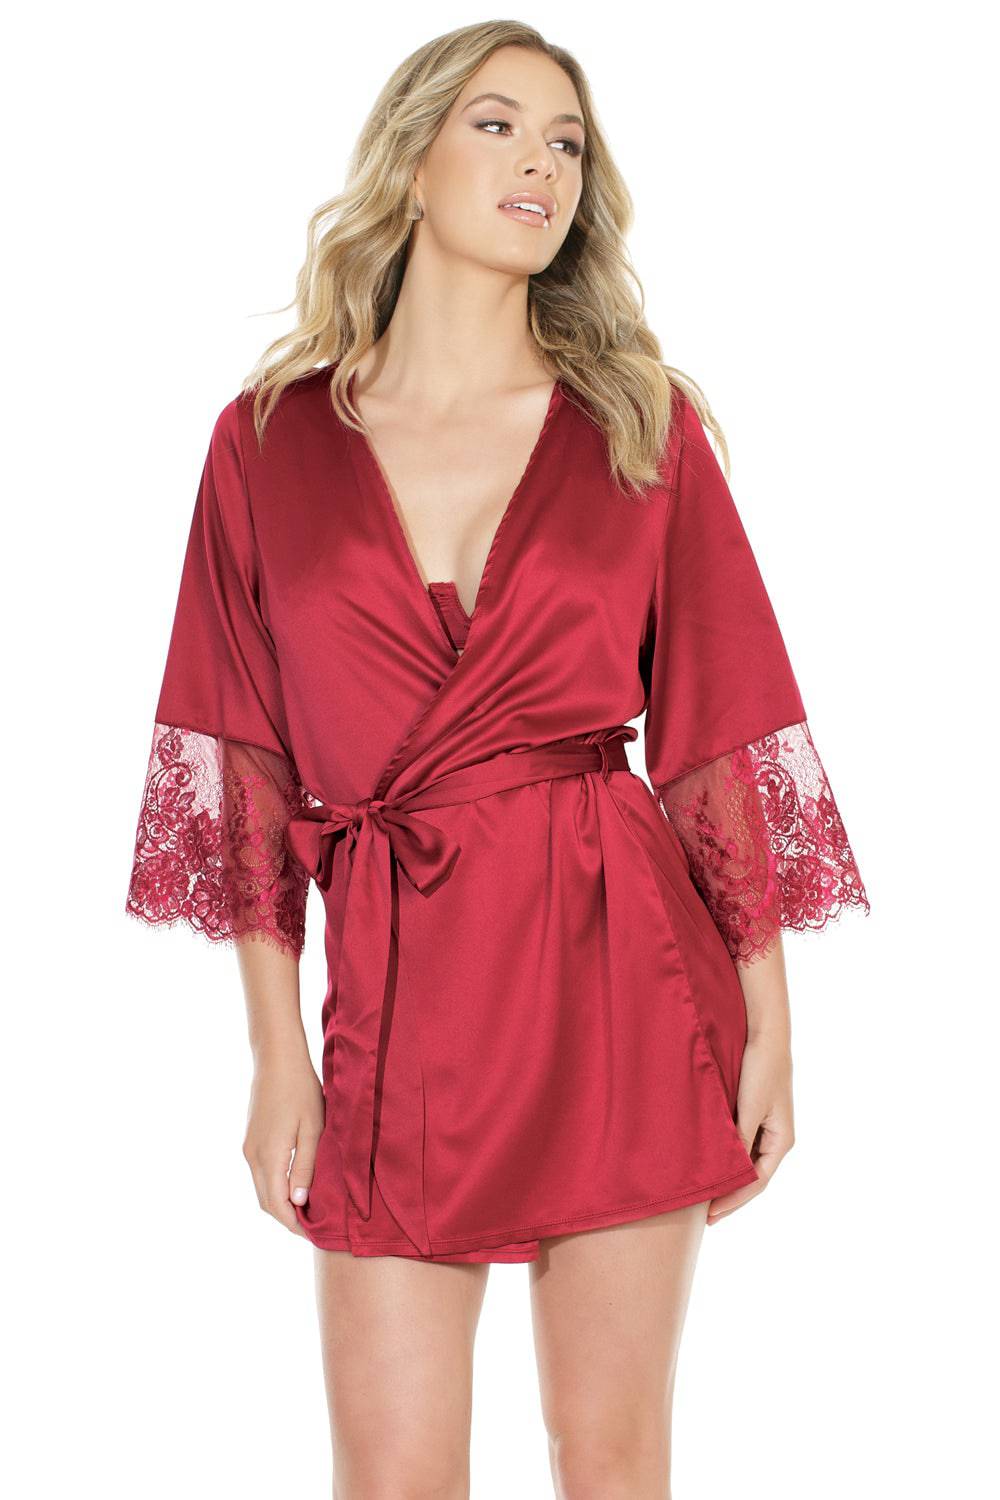 Coquette - 7224 - Satin Robe with Lace Finish - Merlot - OS - Stag Shop